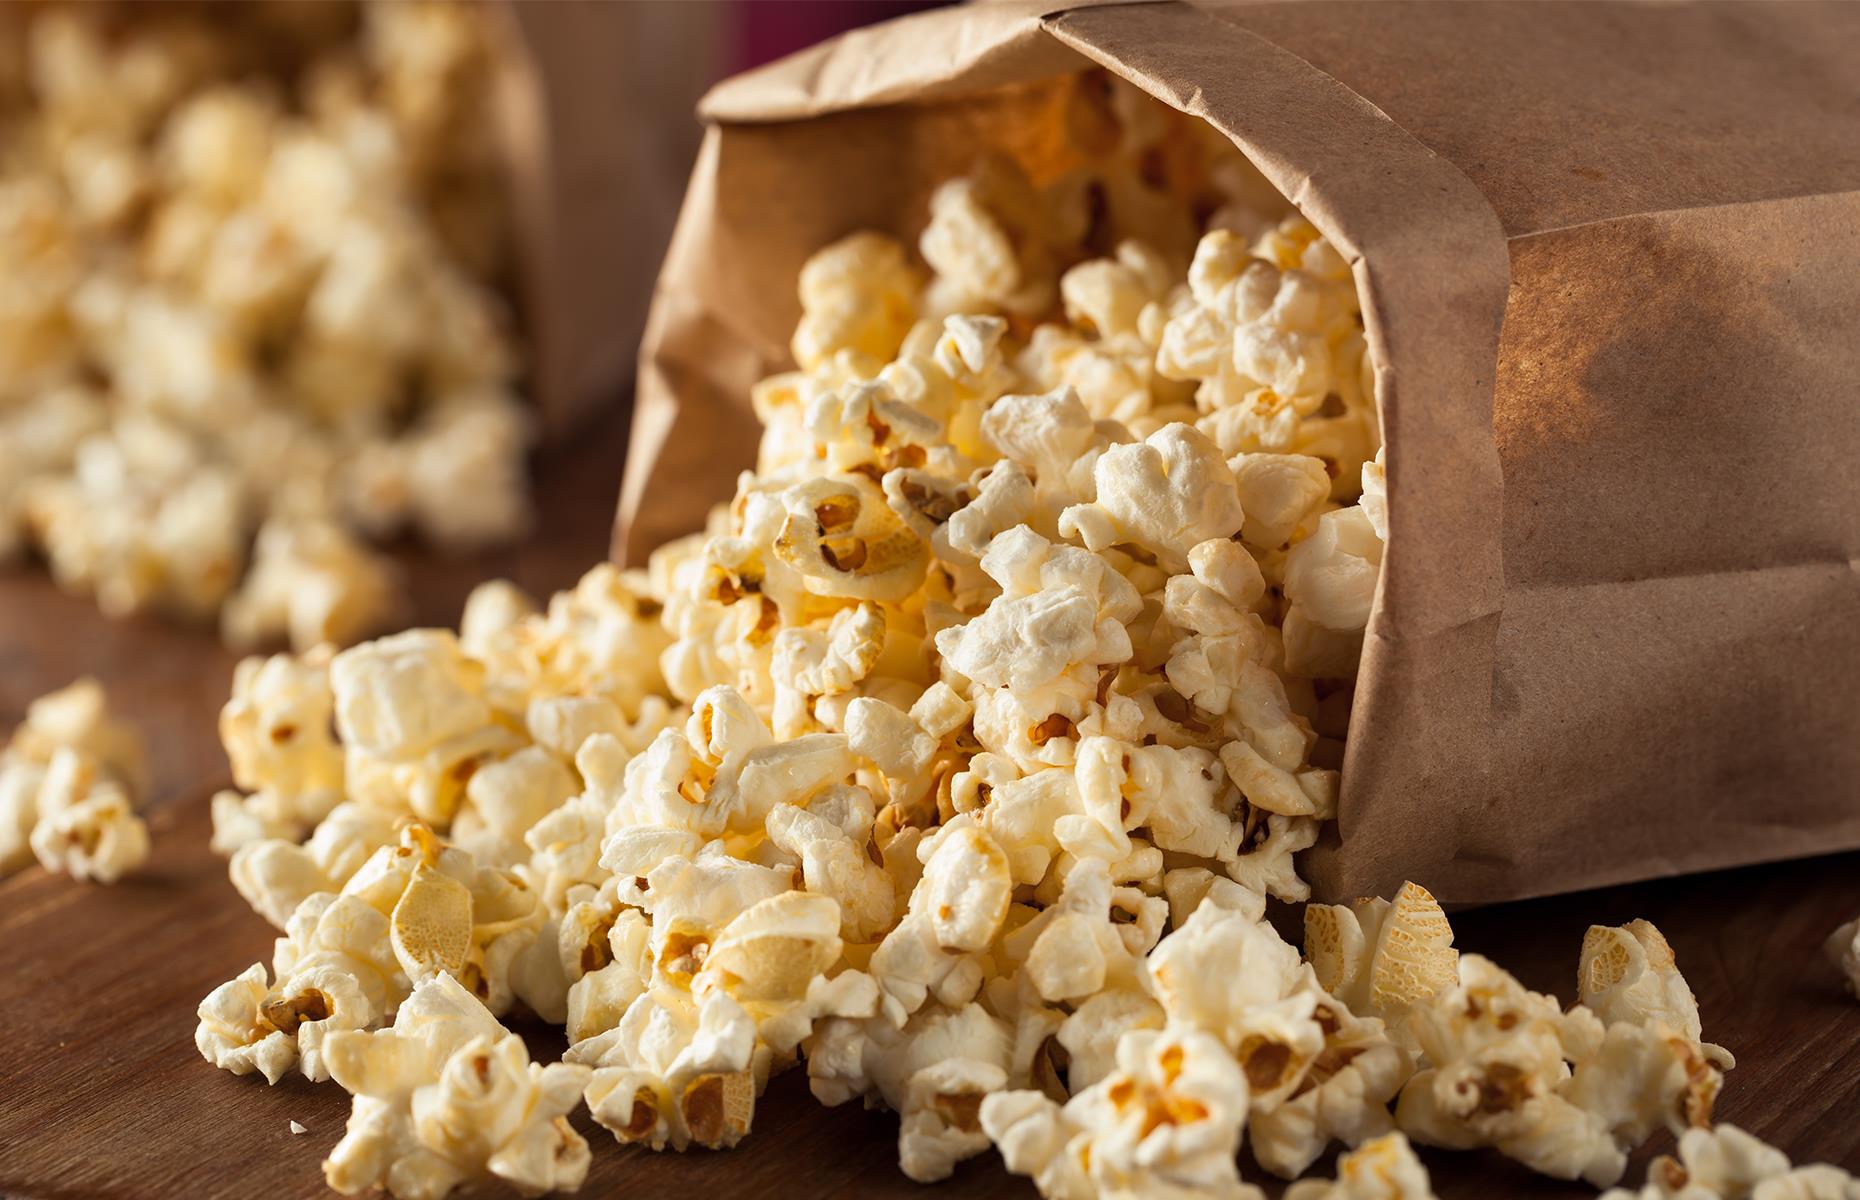 <p>Popcorn may be a favoured movie snack but these sweet or salty bites existed way before the silver screen. Experts believe that corn was cultivated in the Americas as far back as 9,000 years ago, with the earliest traces of popcorn dated to some 6,700 years ago – archaeologists <a href="https://www.nationalgeographic.com/news/2012/1/120119-national-popcorn-day-corn-peru-archaeology-food-science/">found evidence of an old version of the puffed kernel snack</a> in Peru in 2012. Ancient popcorn has been left behind by indigenous American tribes in the states of New Mexico and Utah too.</p>